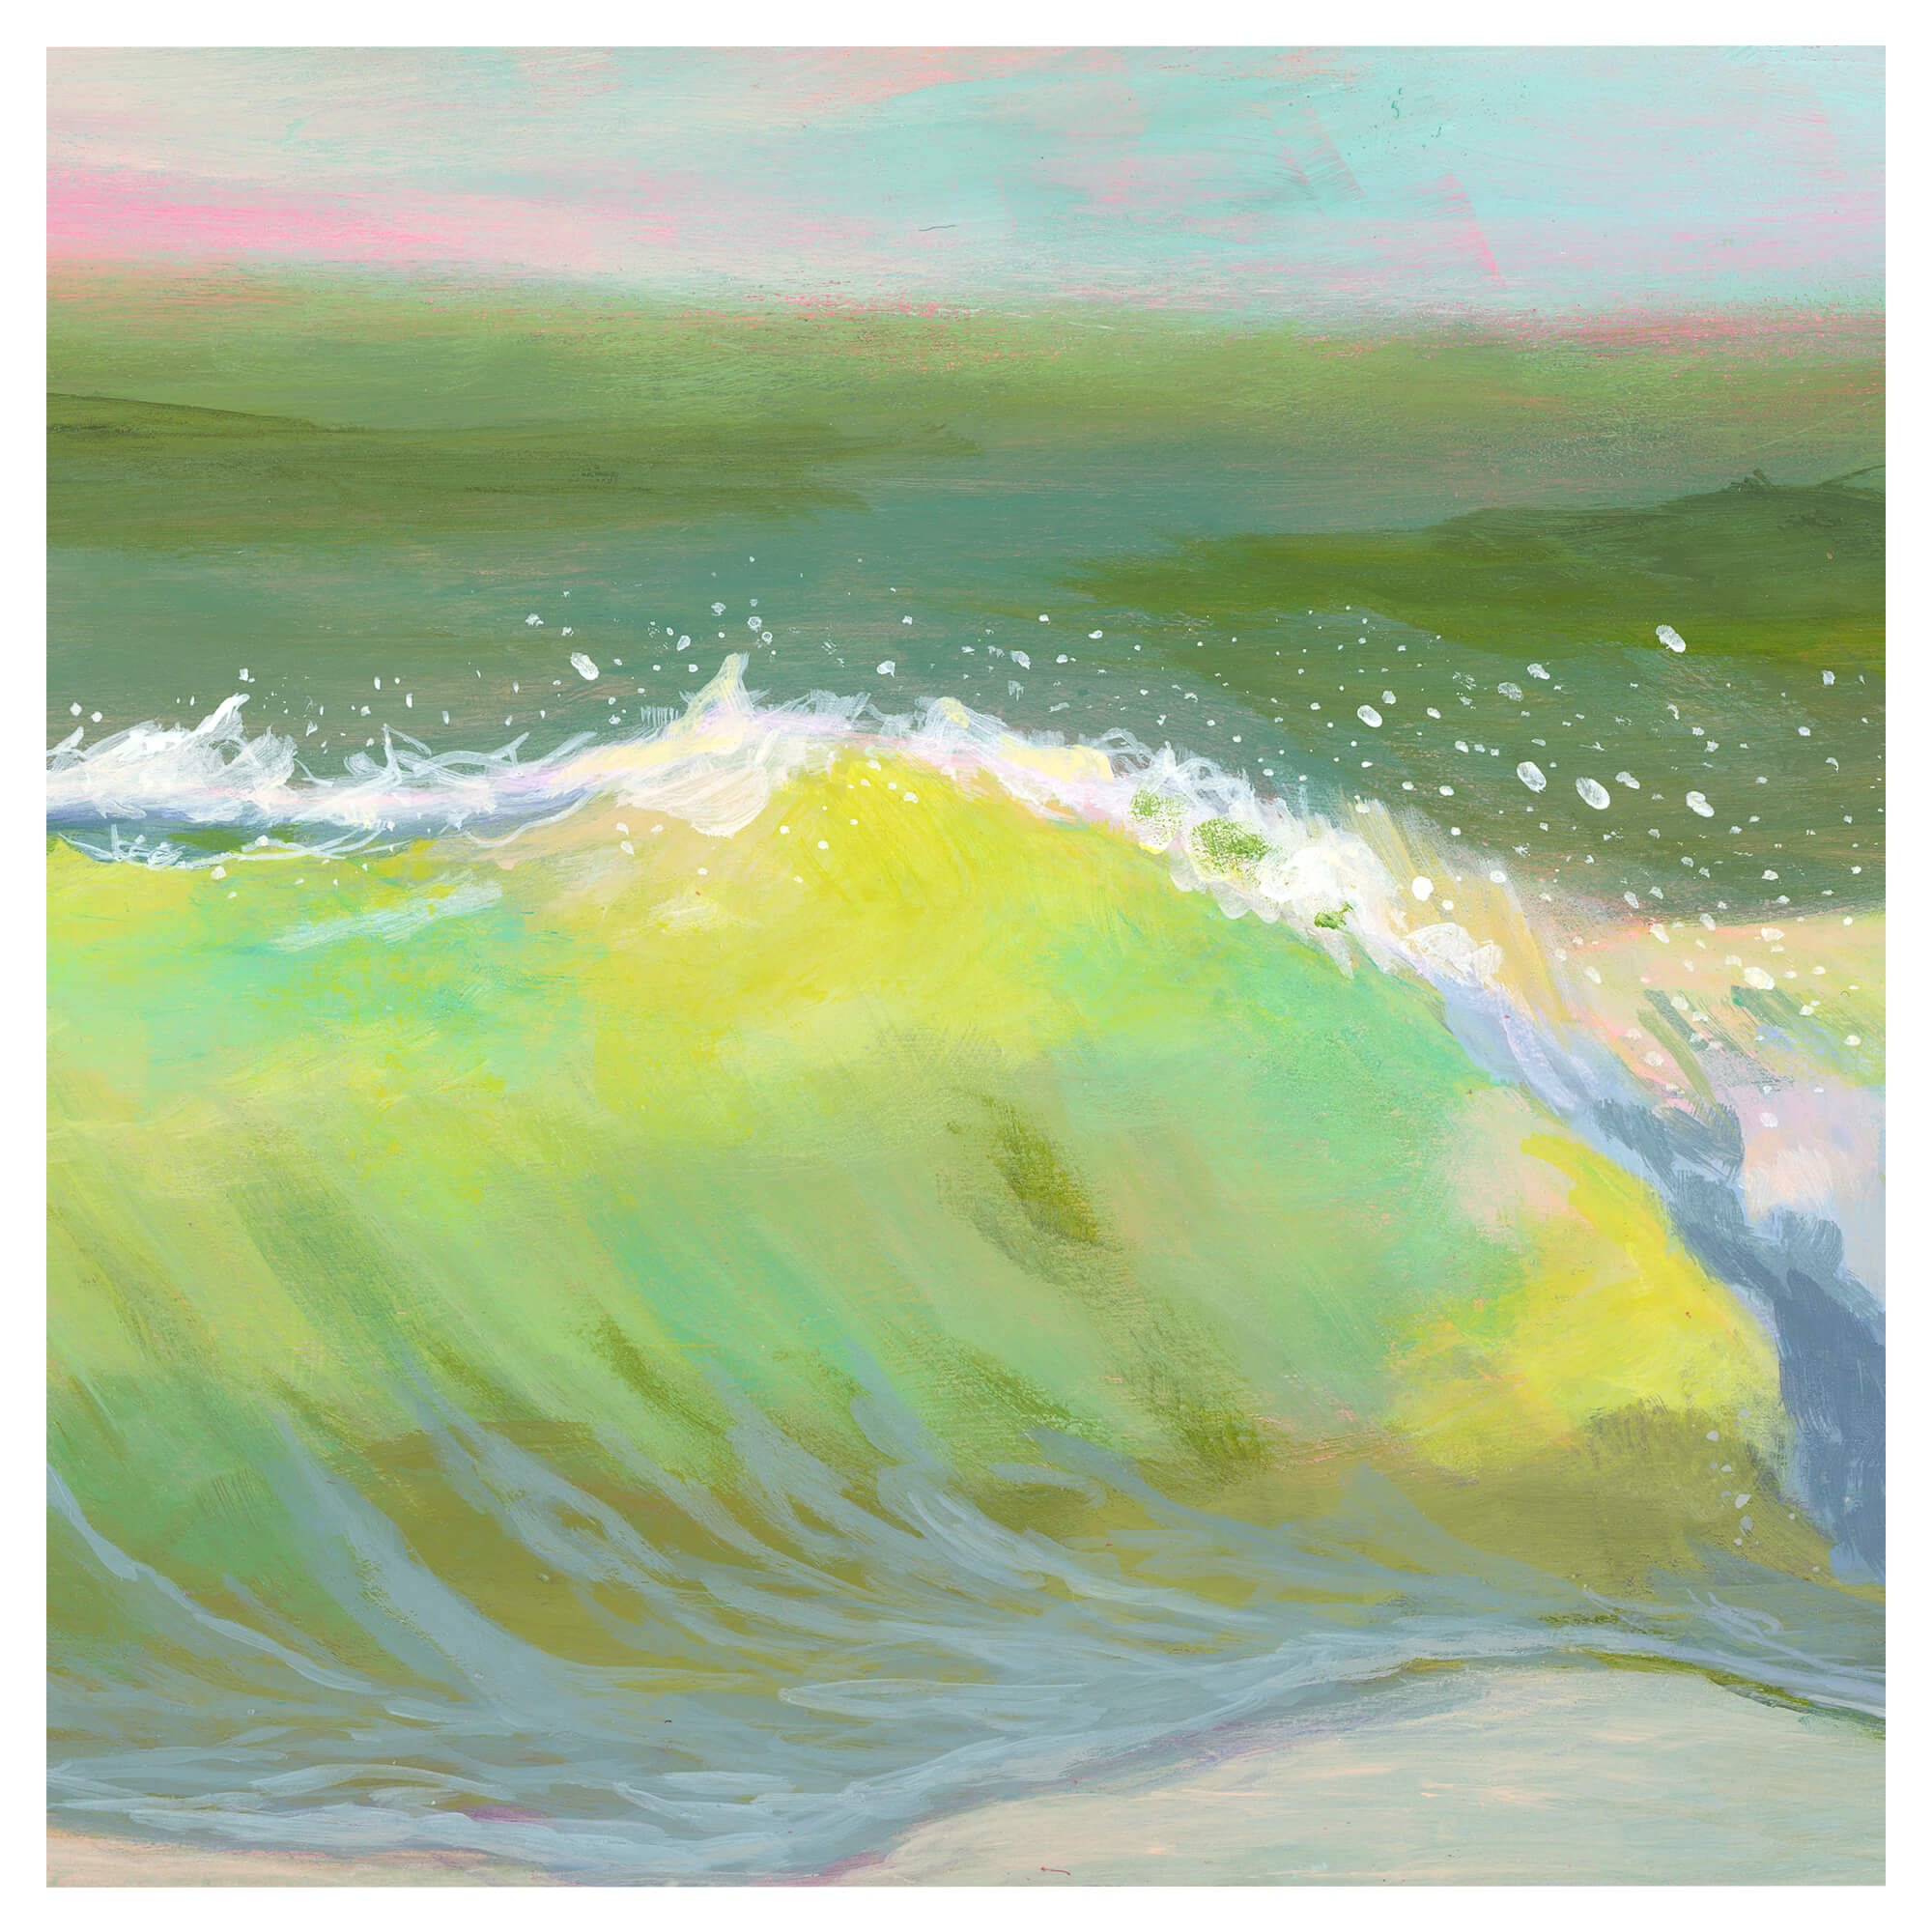 A wave with shades of green and yellow by Hawaii artist Lindsay Wilkins